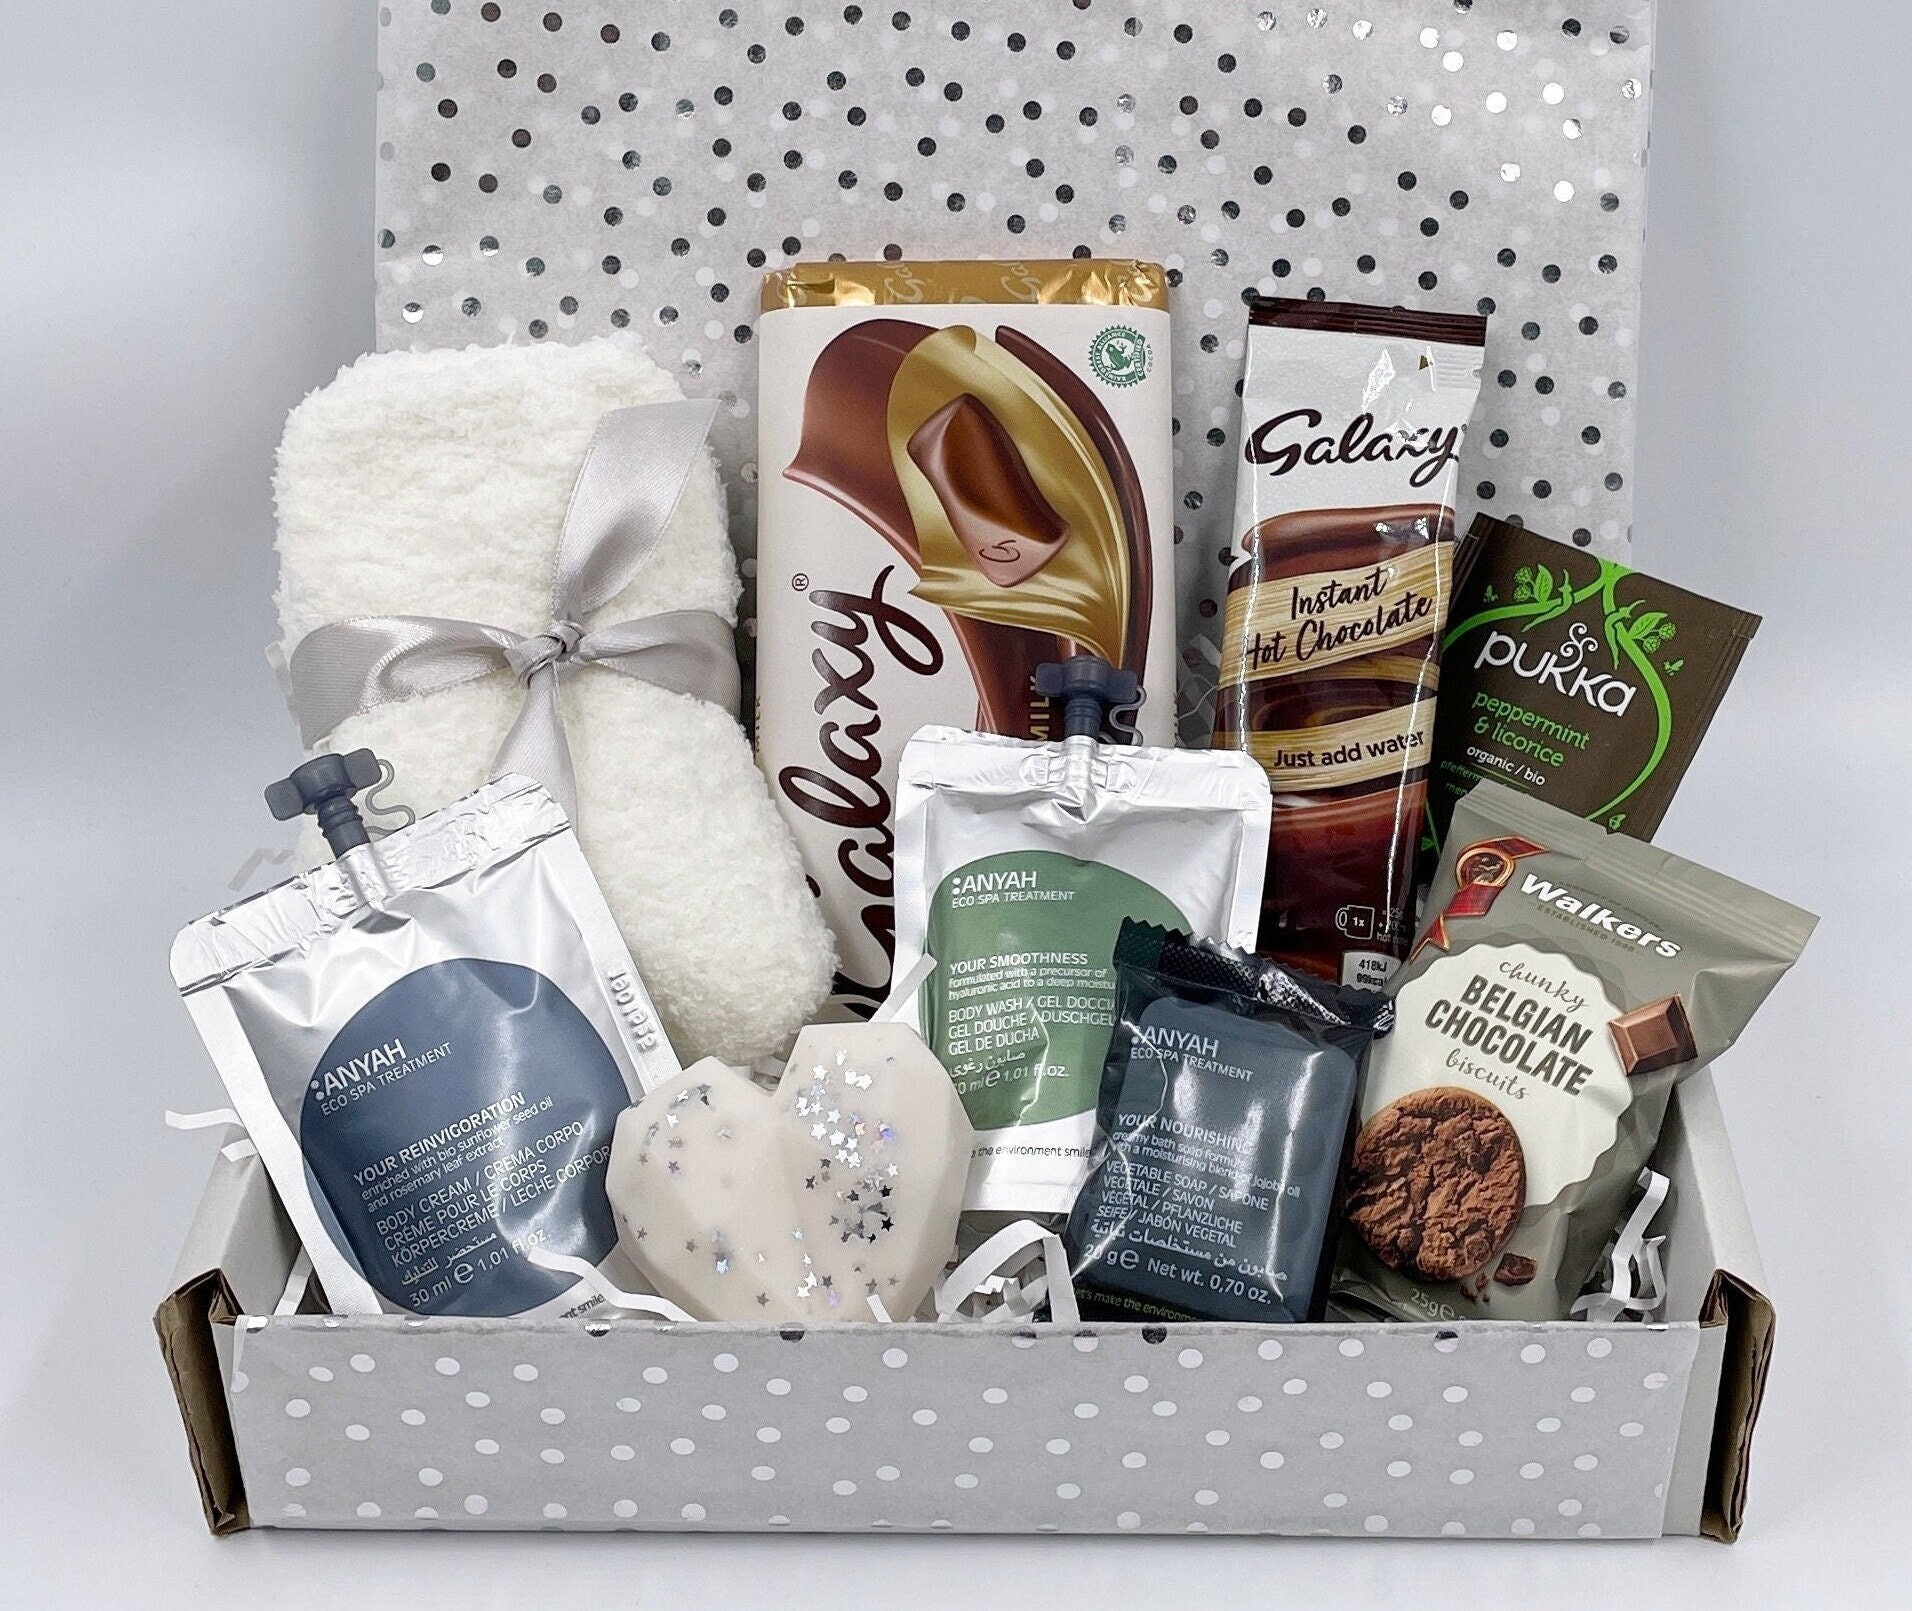 Get Well Soon Gifts for Women, Care Package Get Well Gift Basket for Sick  Friends, Sympathy Gifts Thinking of you After Surgery Feel Better Self Care